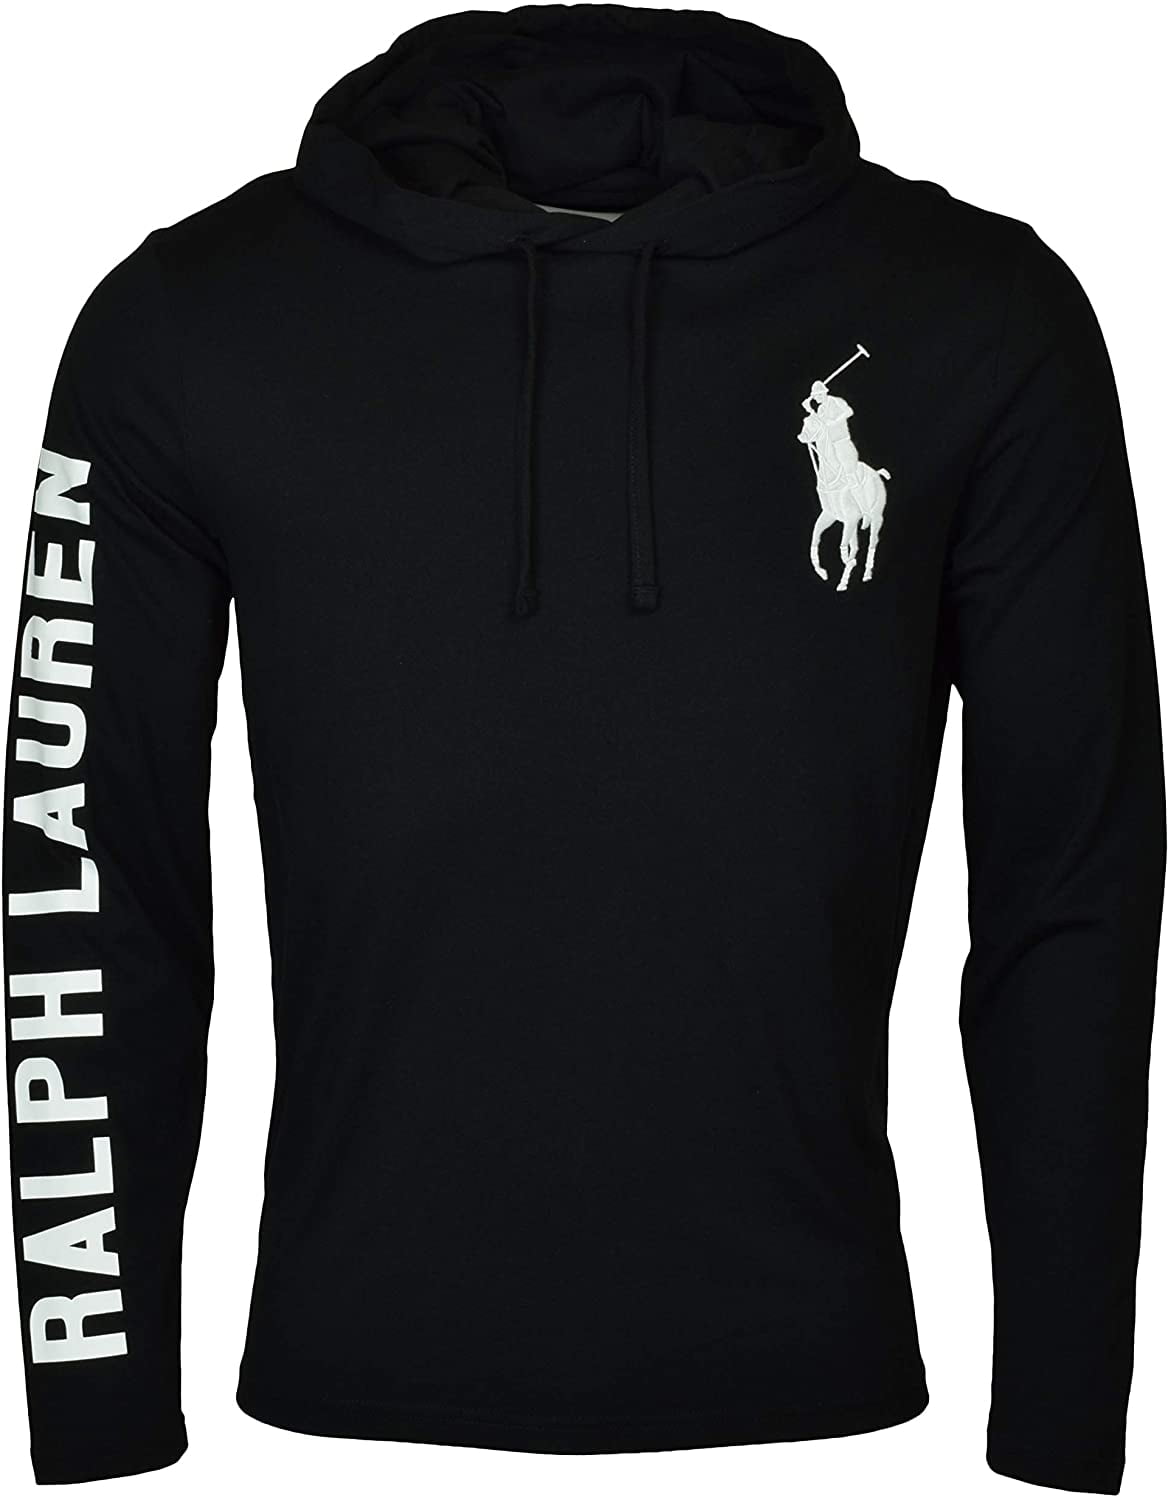 Polo RL Men's Lightweight Long Sleeve Embroidered Pony Graphic Jersey Hoodie 